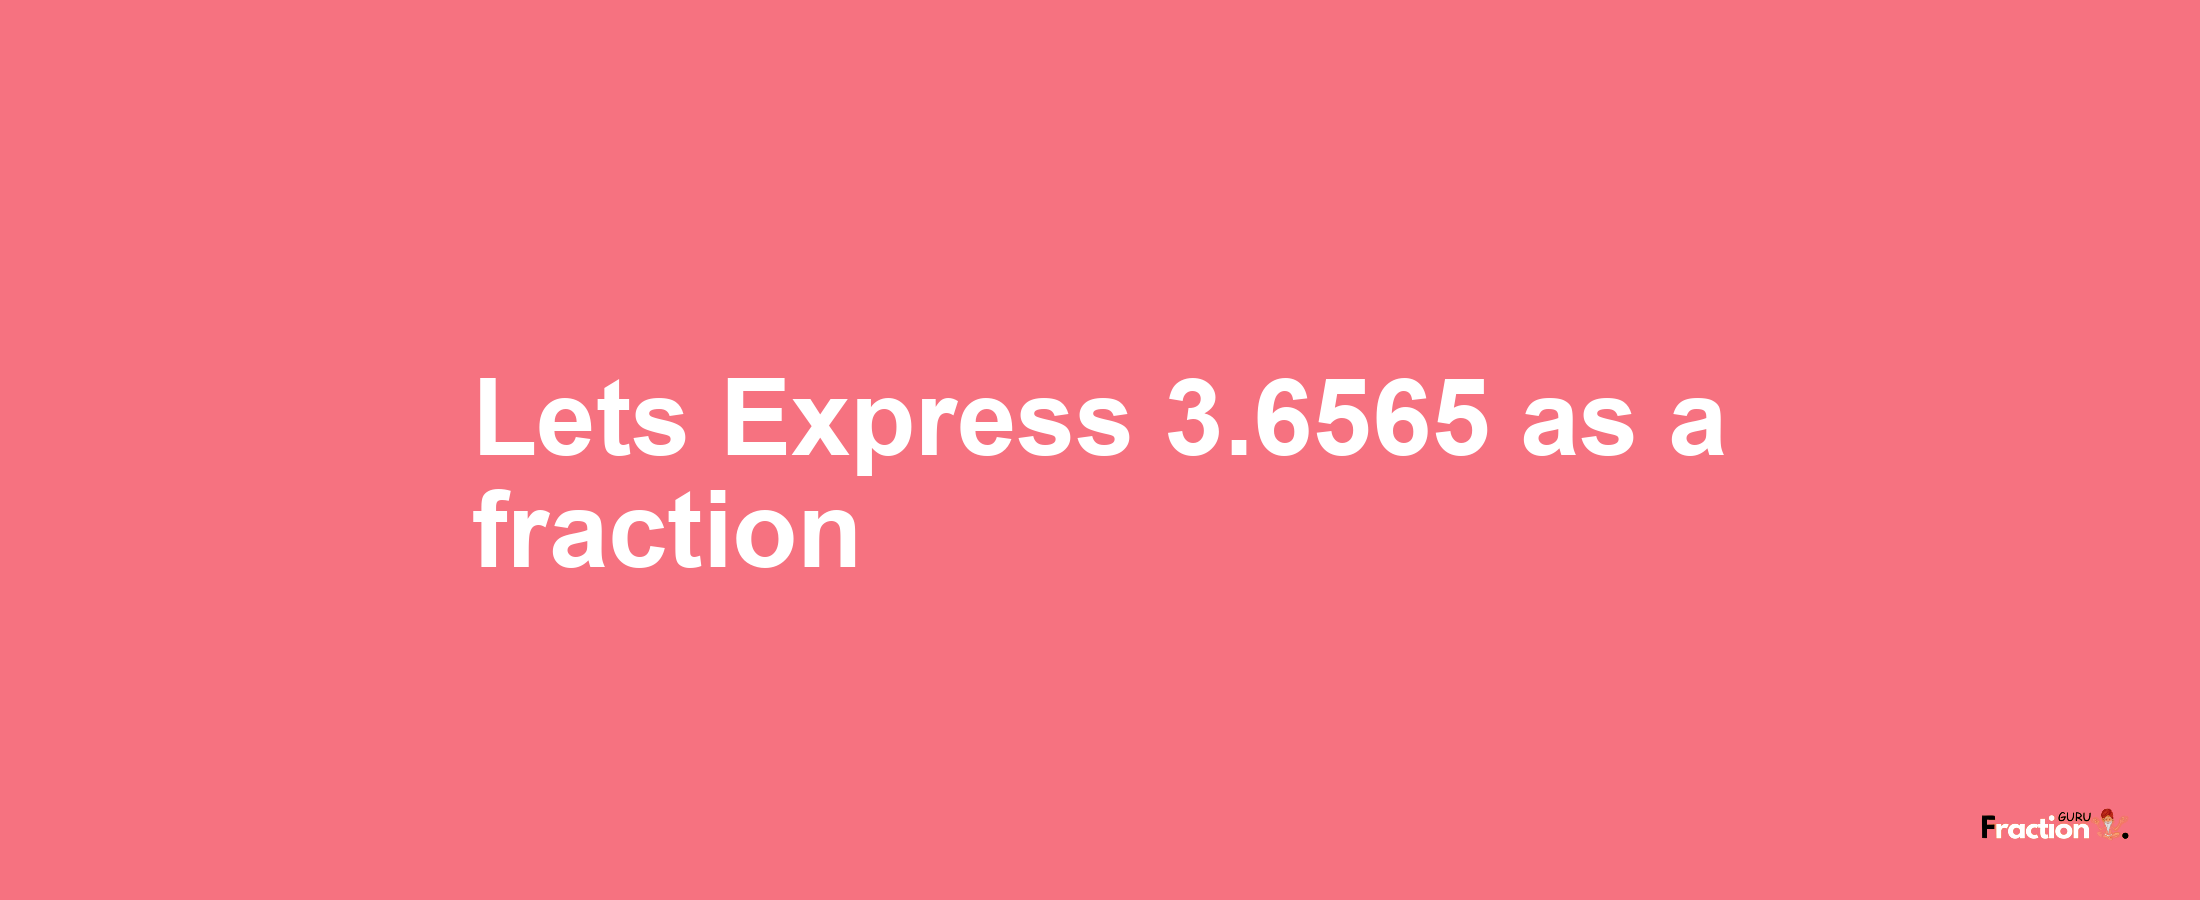 Lets Express 3.6565 as afraction